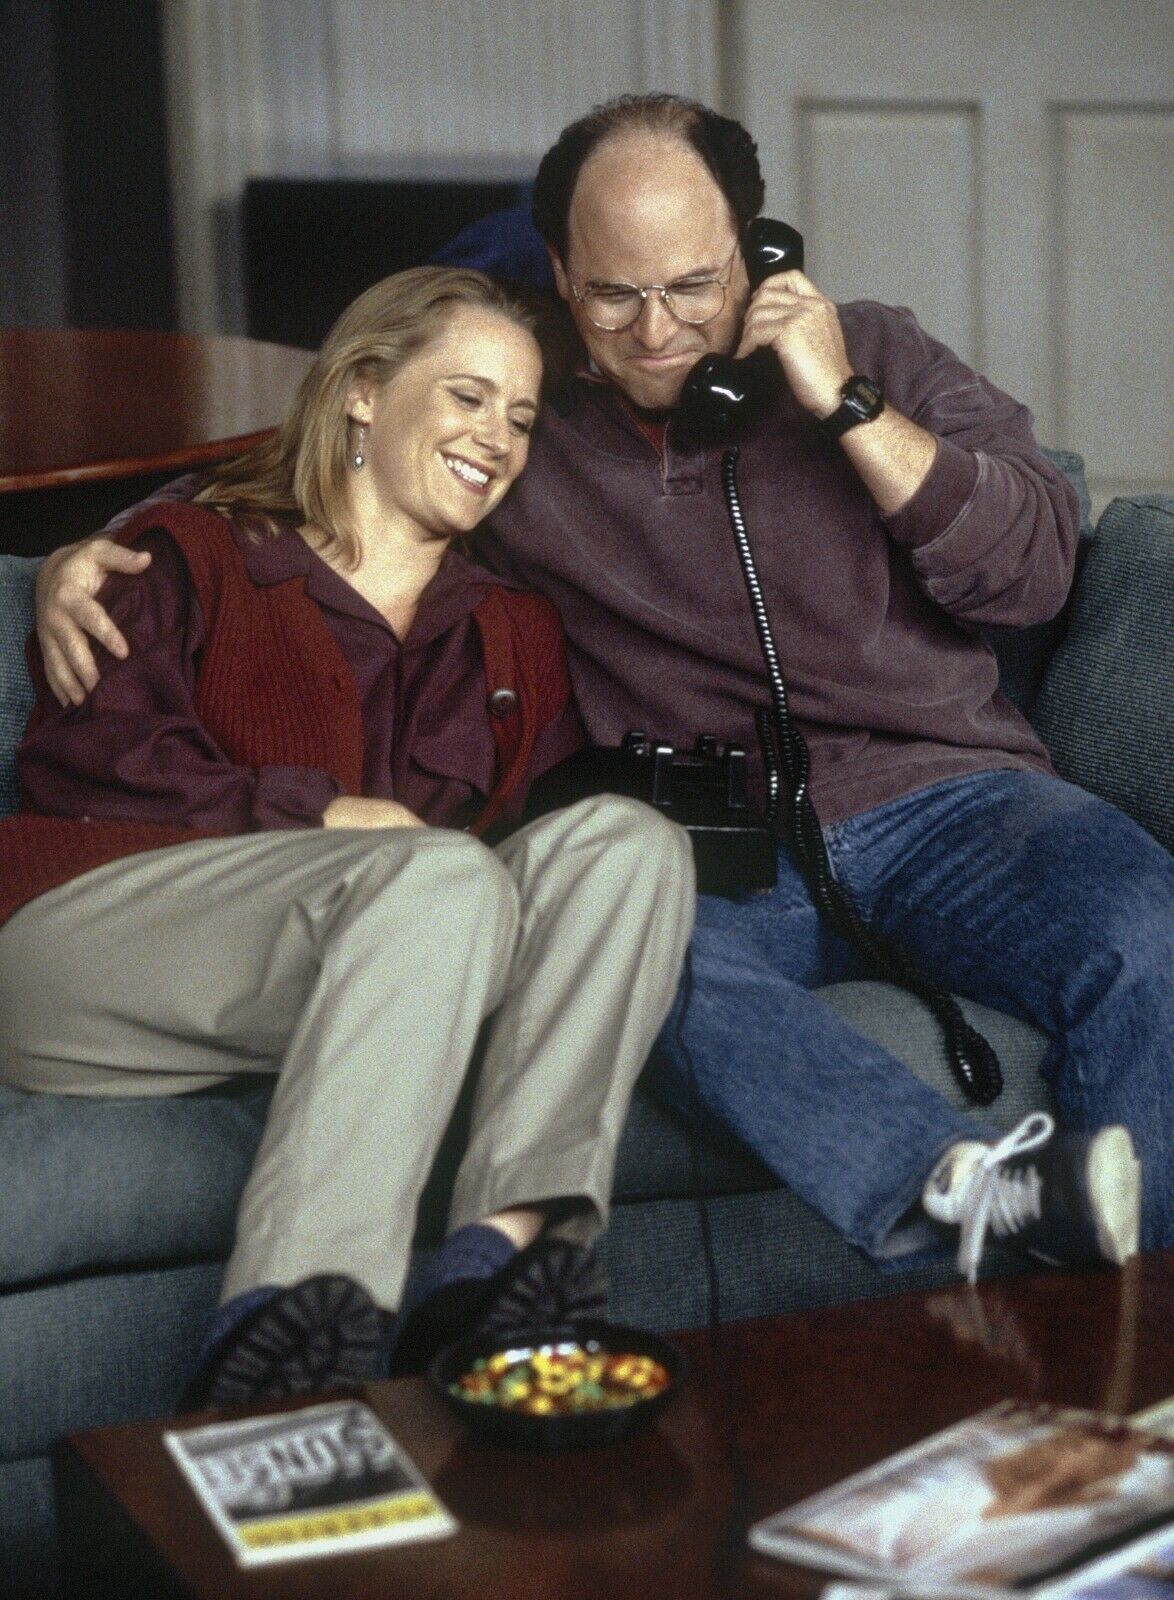 Seinfeld - Tv Show Photo #23 - Episode Photo - George And Susan